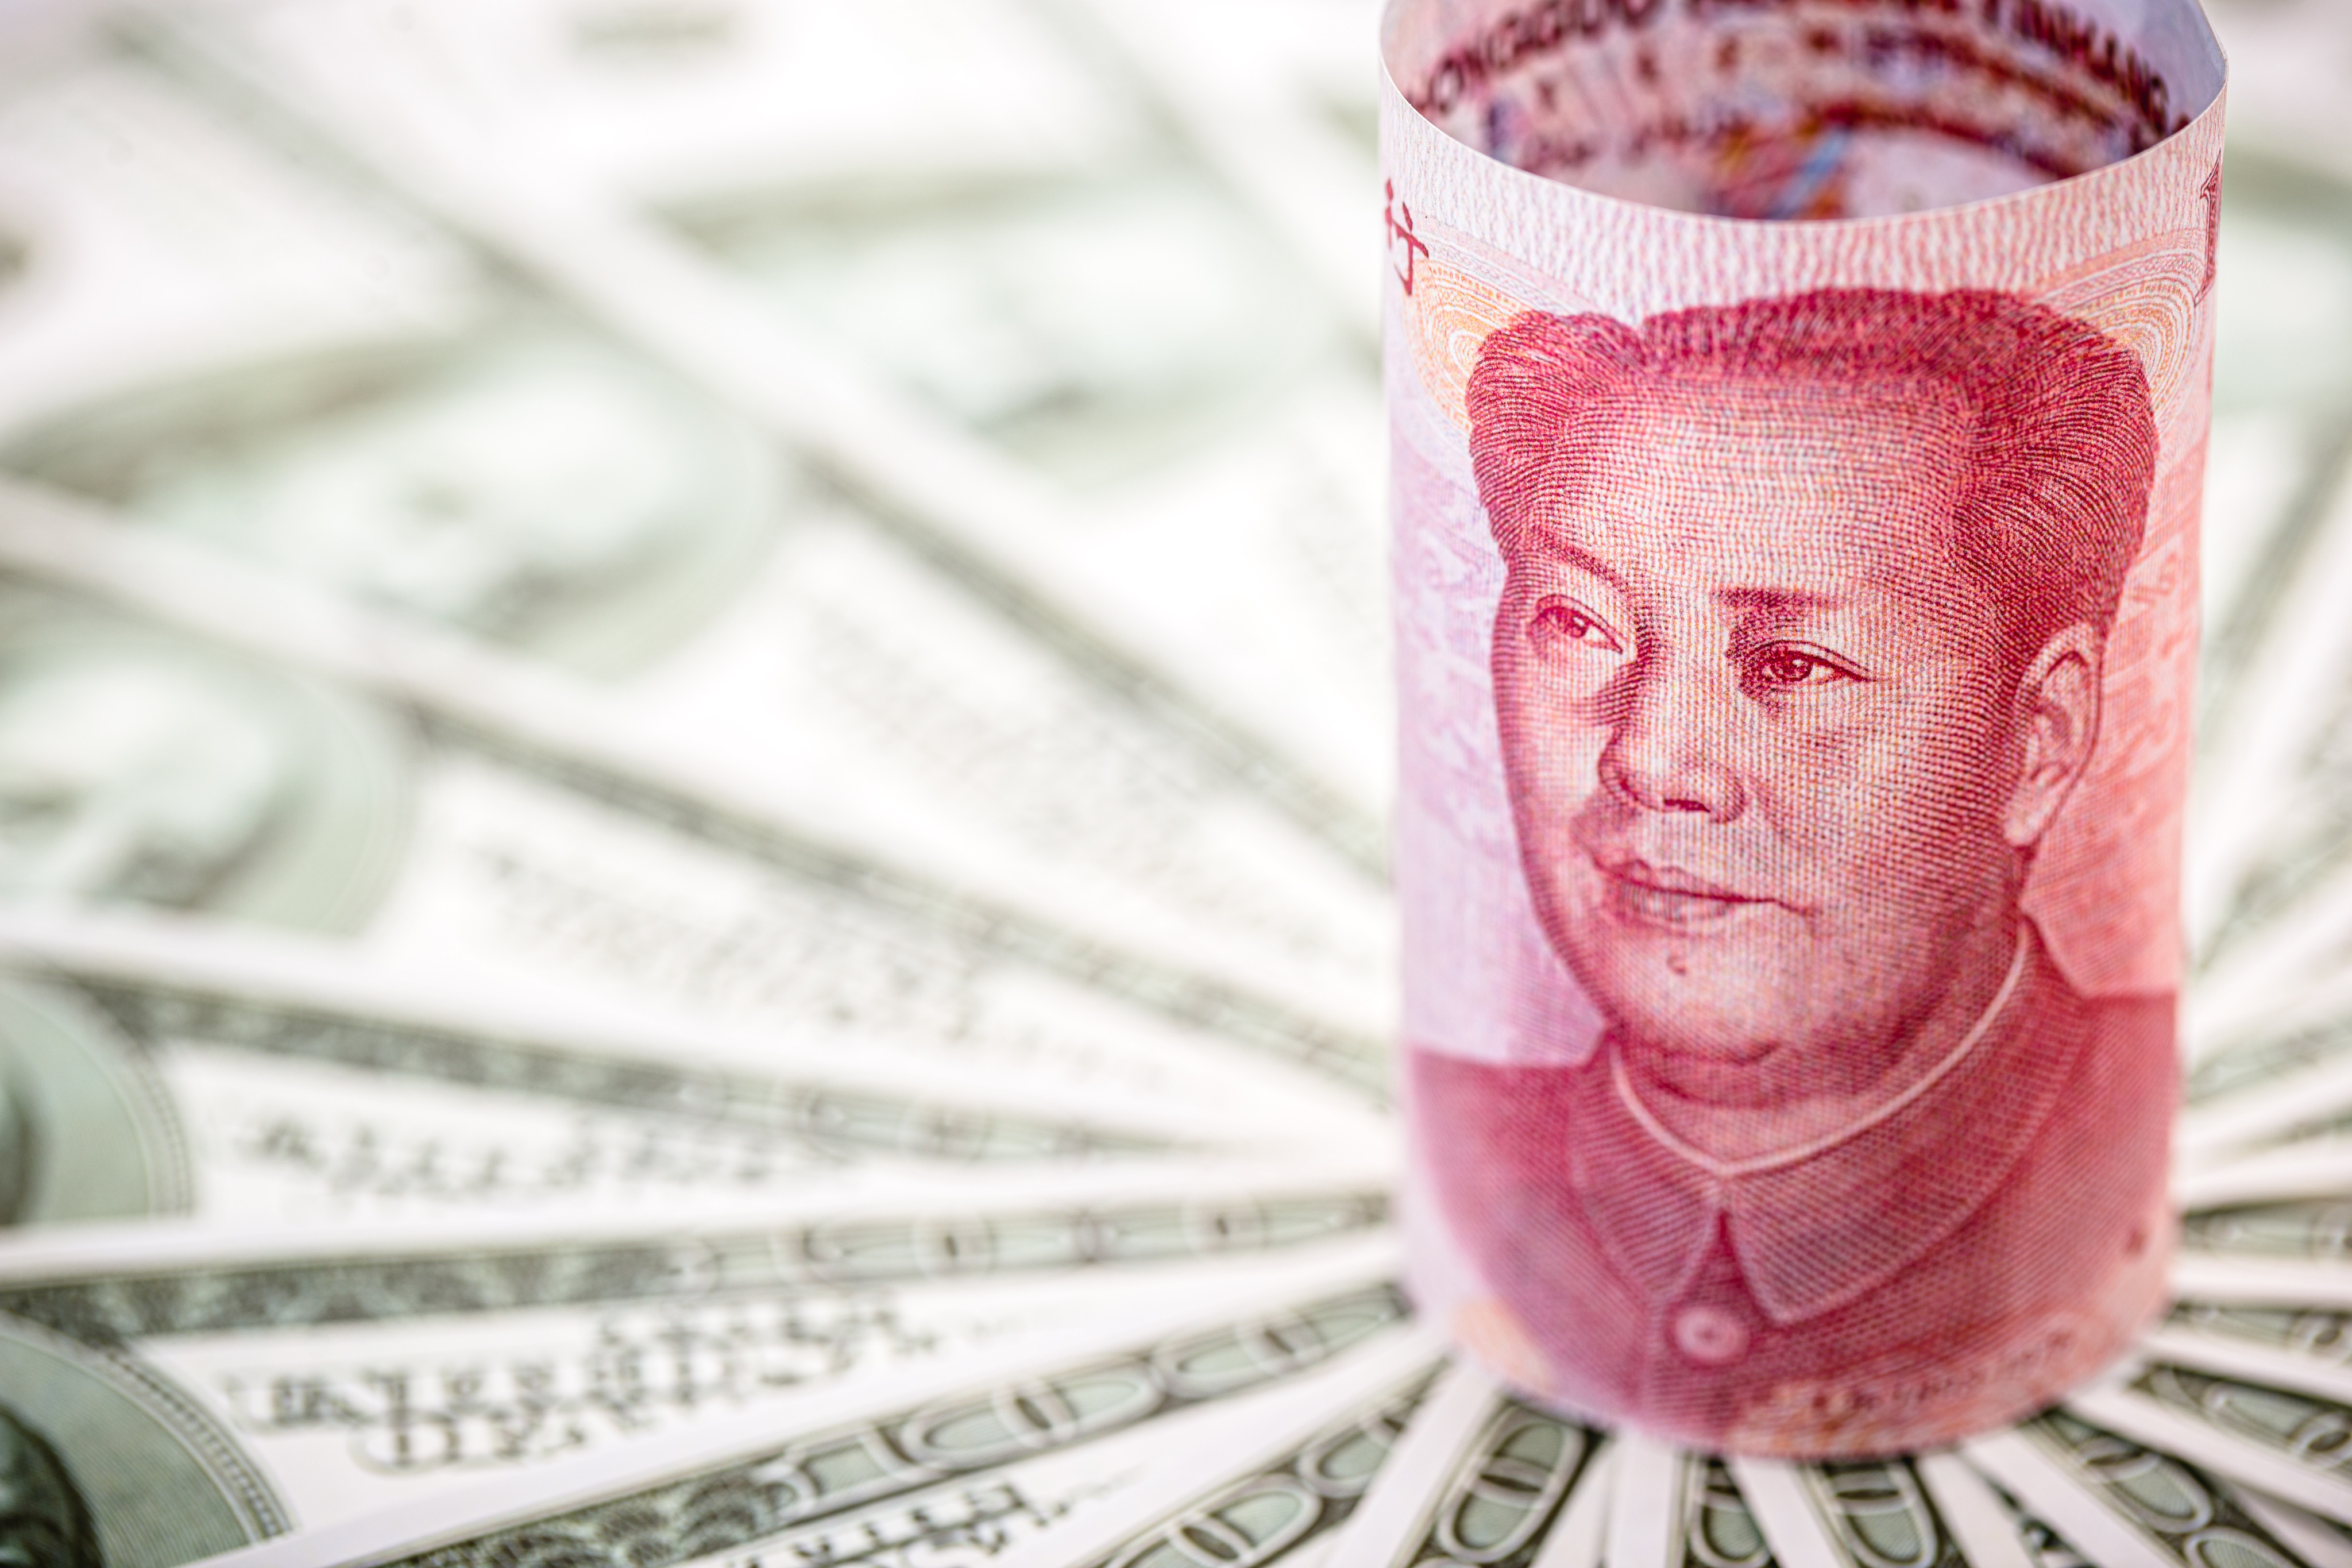 Counterarguments against the dollar’s demise neglect the growing attractiveness of the renminbi both as a store of value and as a vehicle for international trade and investment.
Ultimately, however, the internationalisation of the yuan does not mean the US has to be a loser. Photo: Shutterstock